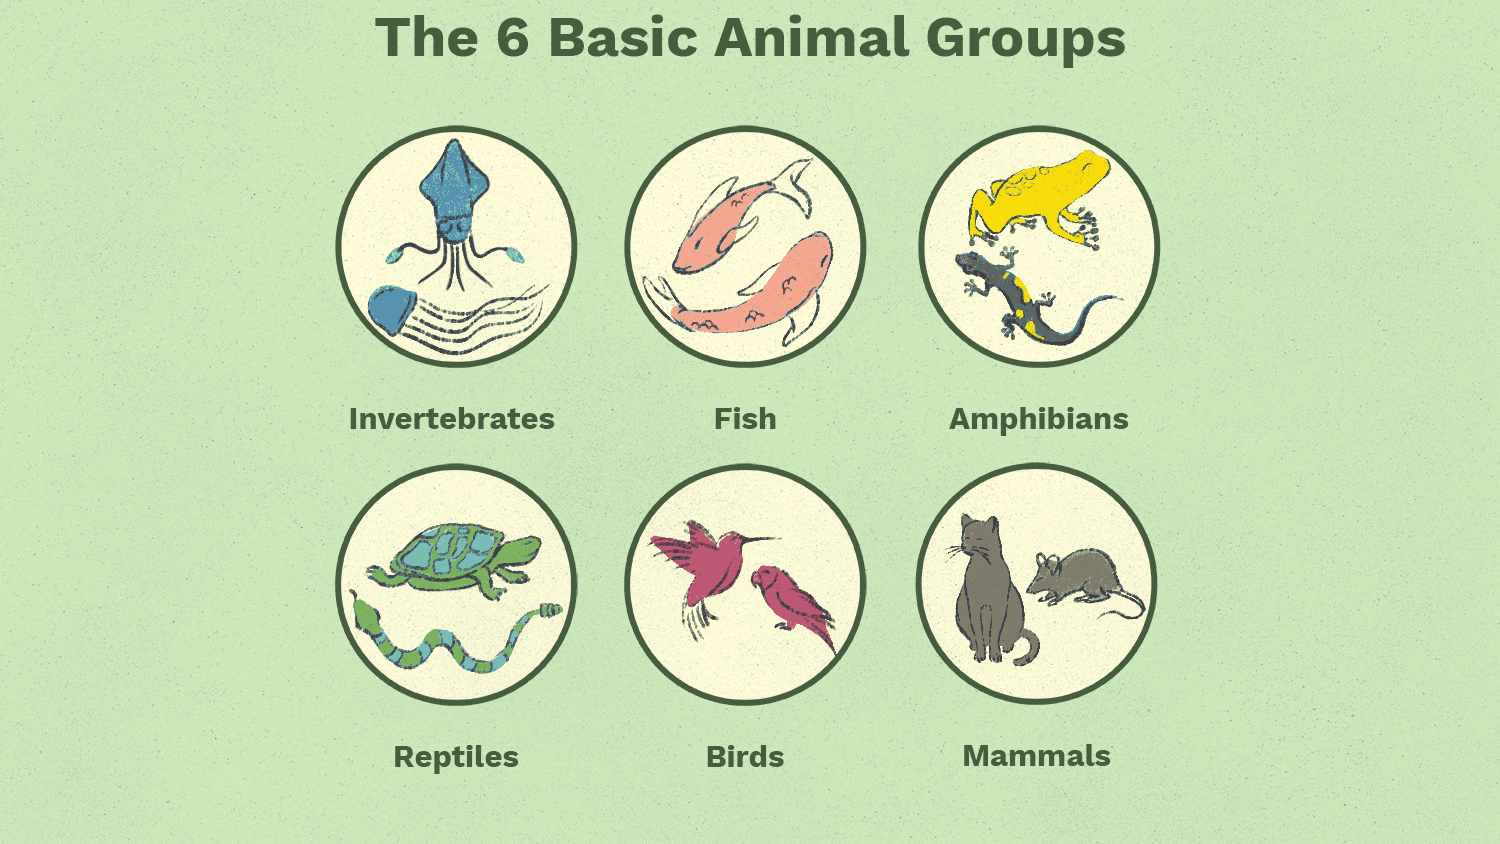 What are the 6 classes of animals and their types?